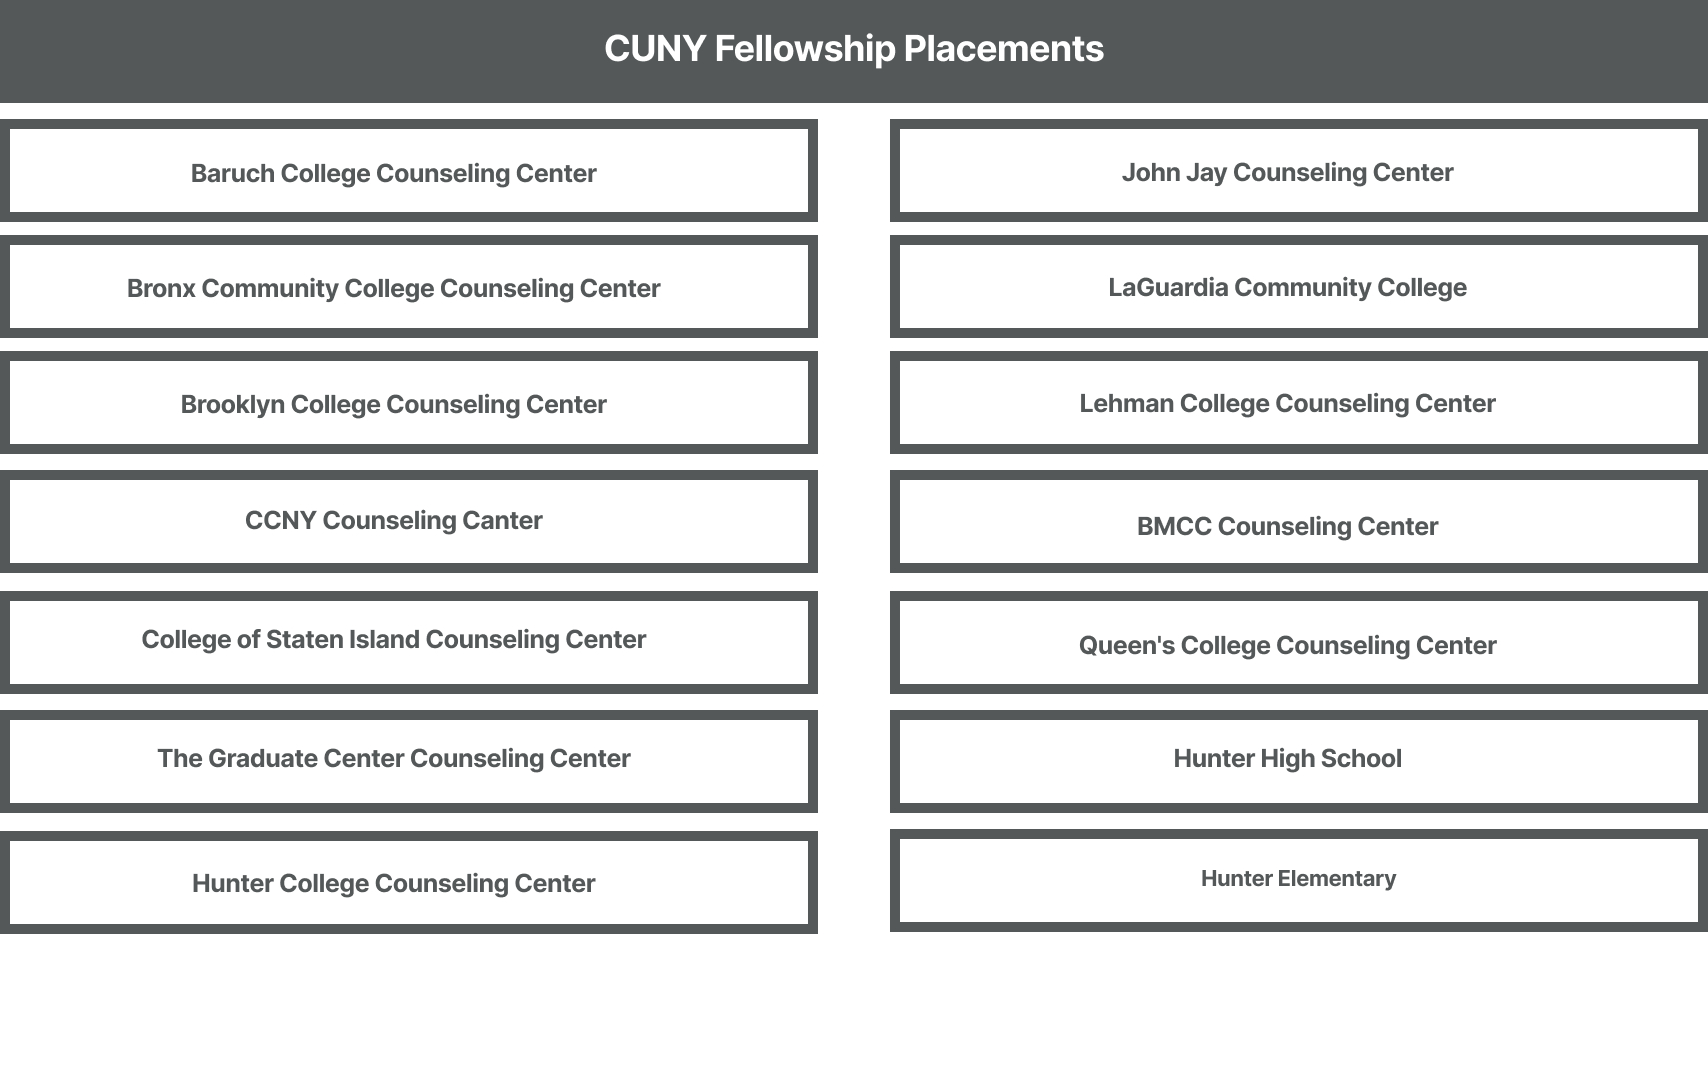 CUNY Fellowship Placements, Baruch College Counseling Center, Brooklyn College Counseling Center, CCNY Counseling Canter, College of Staten Island Counseling Center, The Graduate Center Counseling Center, Hunter College Counseling Center, John Jay Counseling Center, LaGuardia Community College, Lehman College Counseling Center, BMCC Counseling Center, Queen's College Counseling Center, Hunter High School, Hunter Elementary